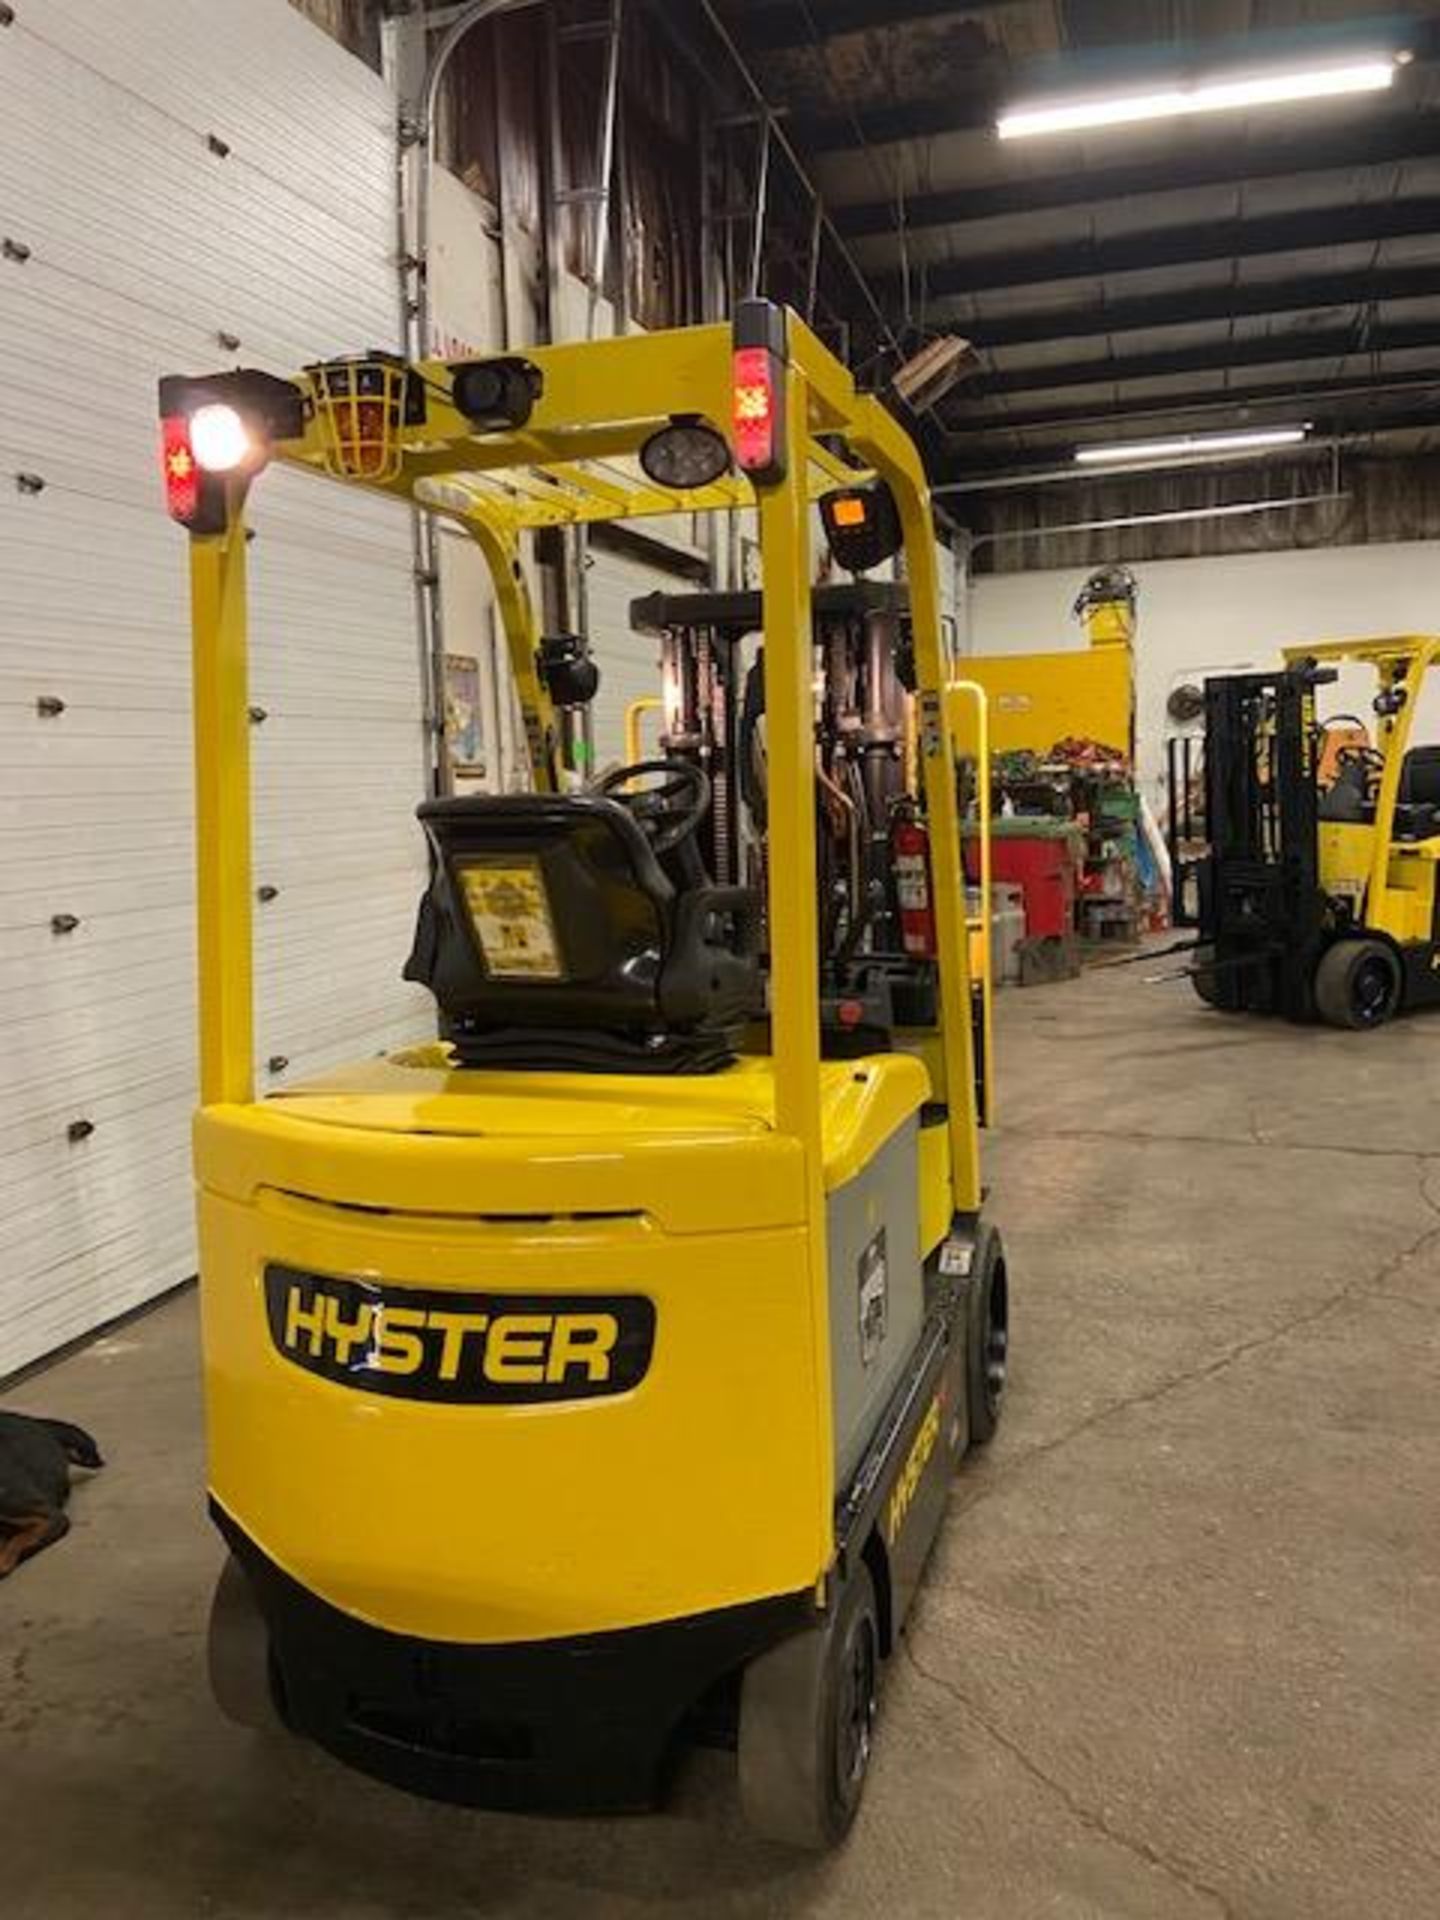 FREE CUSTOMS - 2012 Hyster 5000lbs Capacity Forklift Electric with 3-STAGE MAST with sideshift and - Image 3 of 3